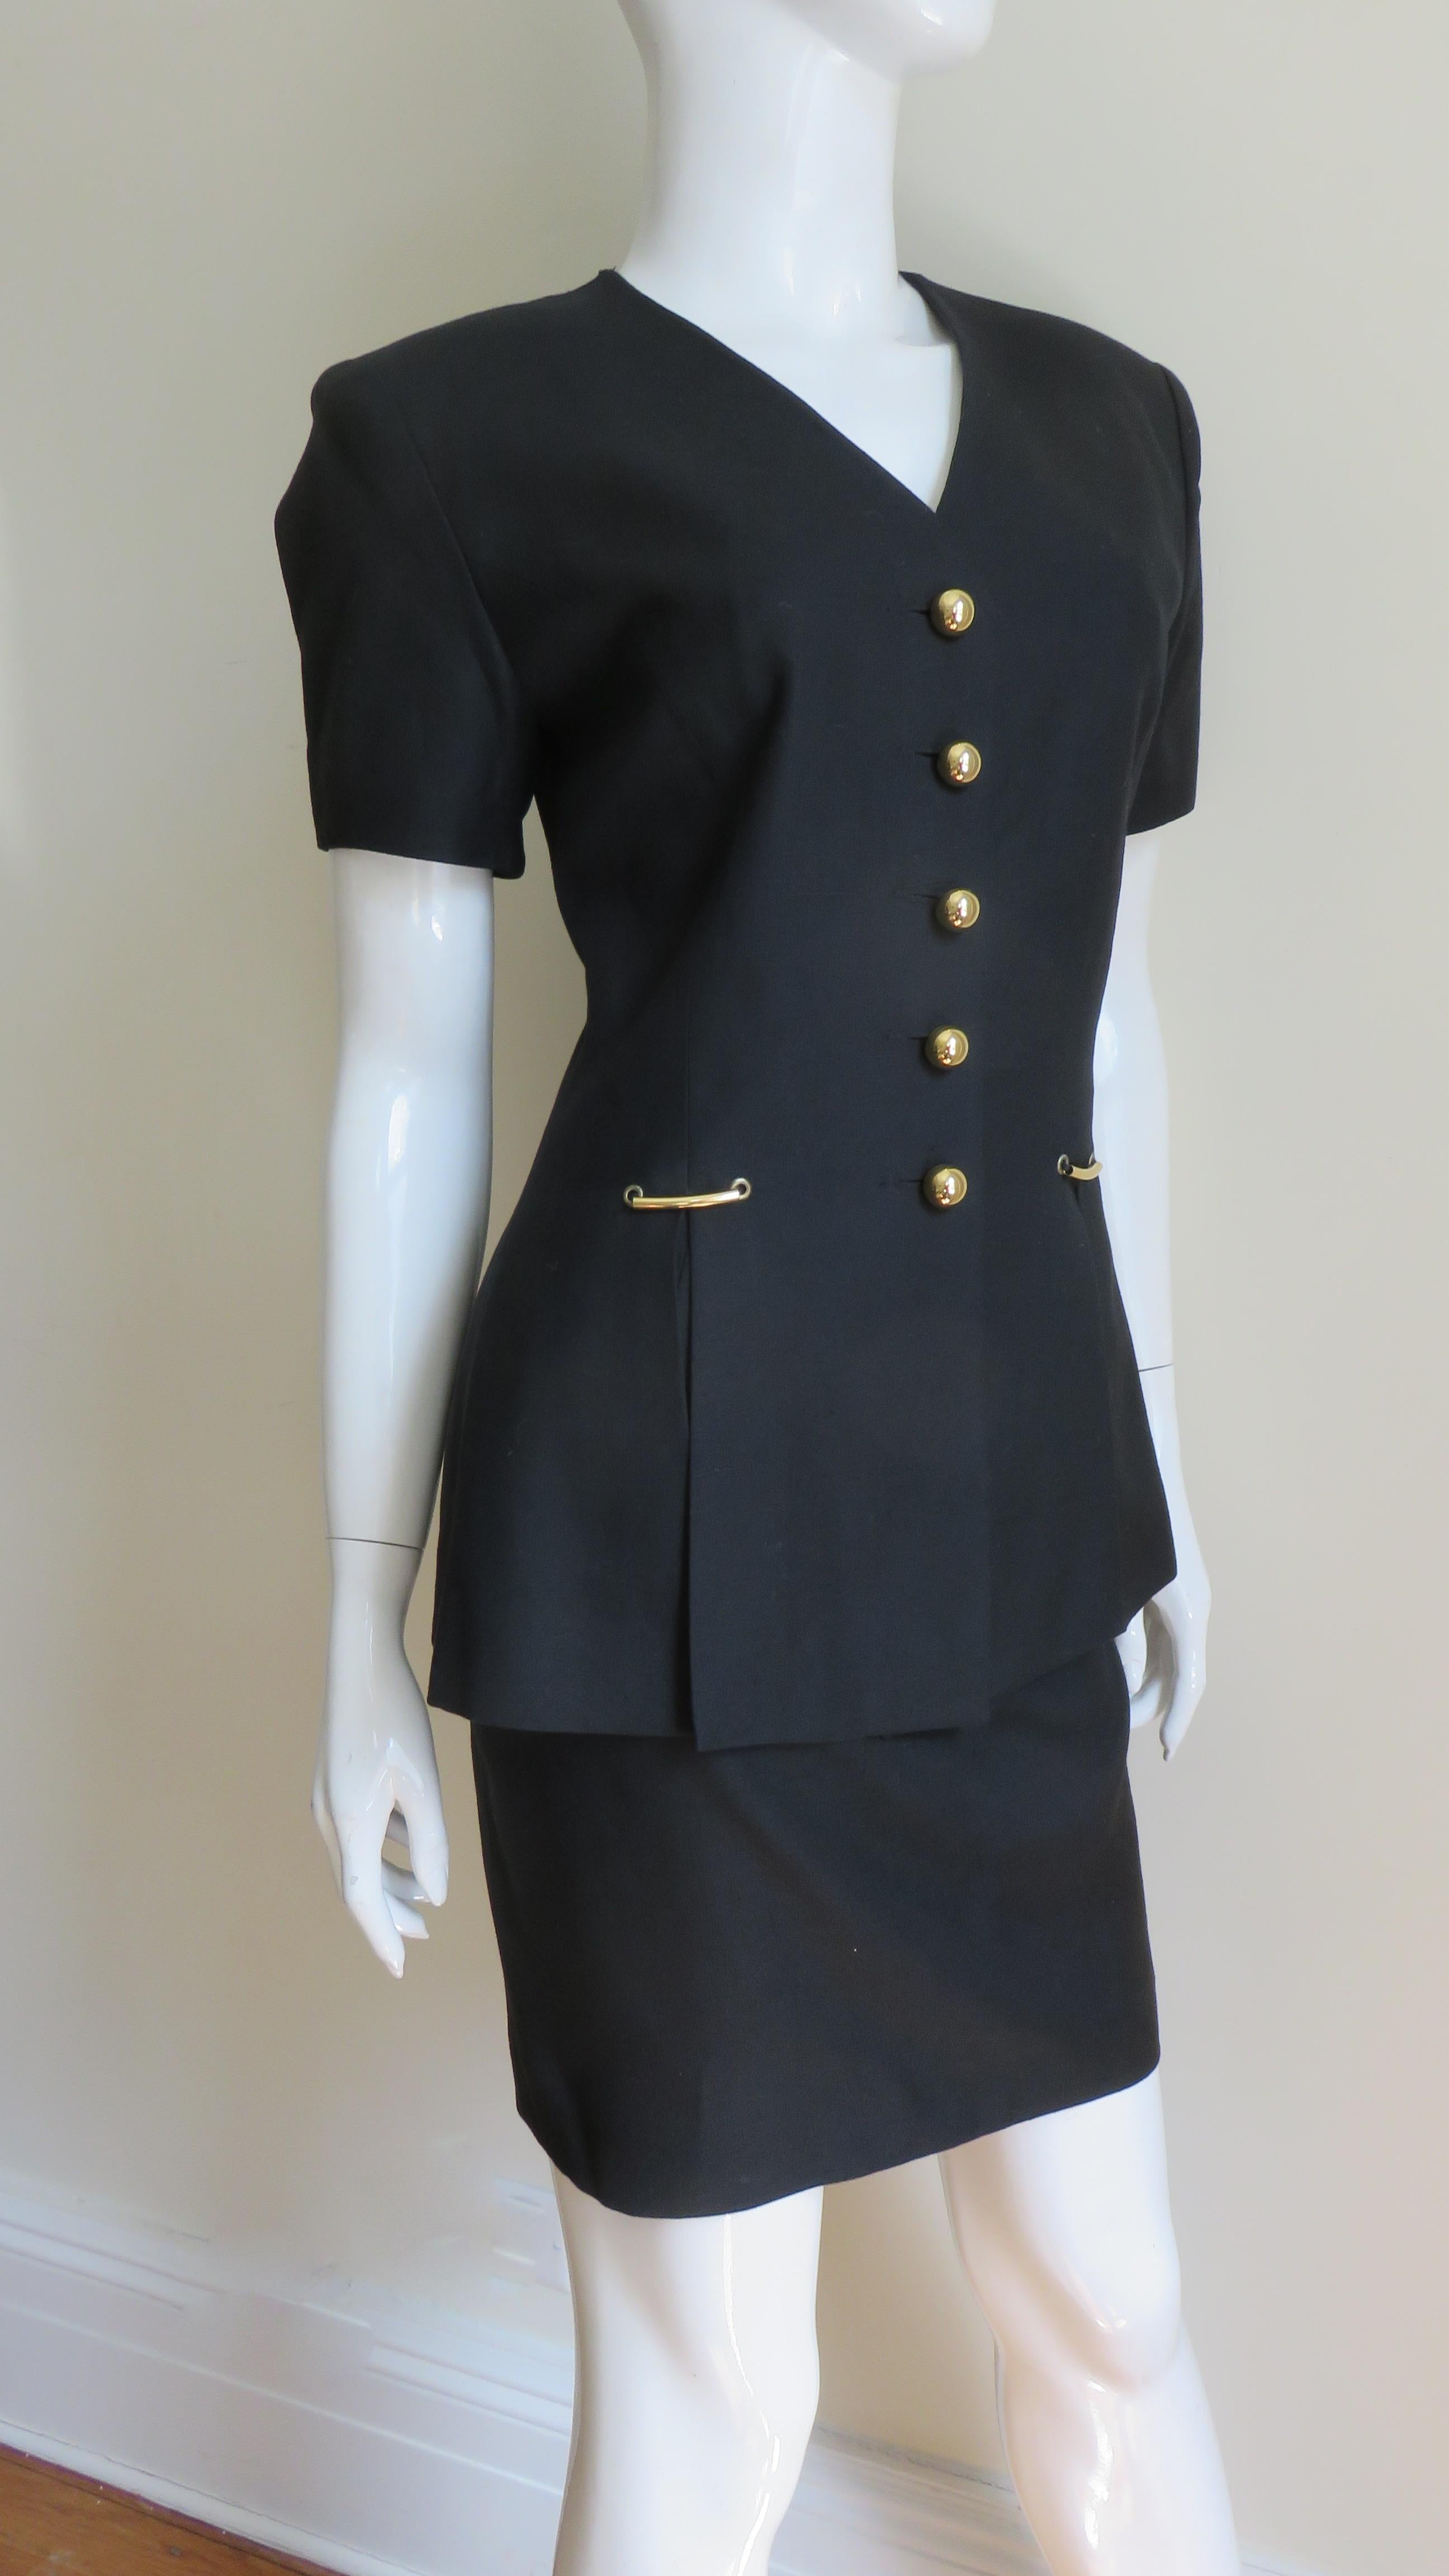 Gianfranco Ferre Skirt Suit with Cut out Jacket 1